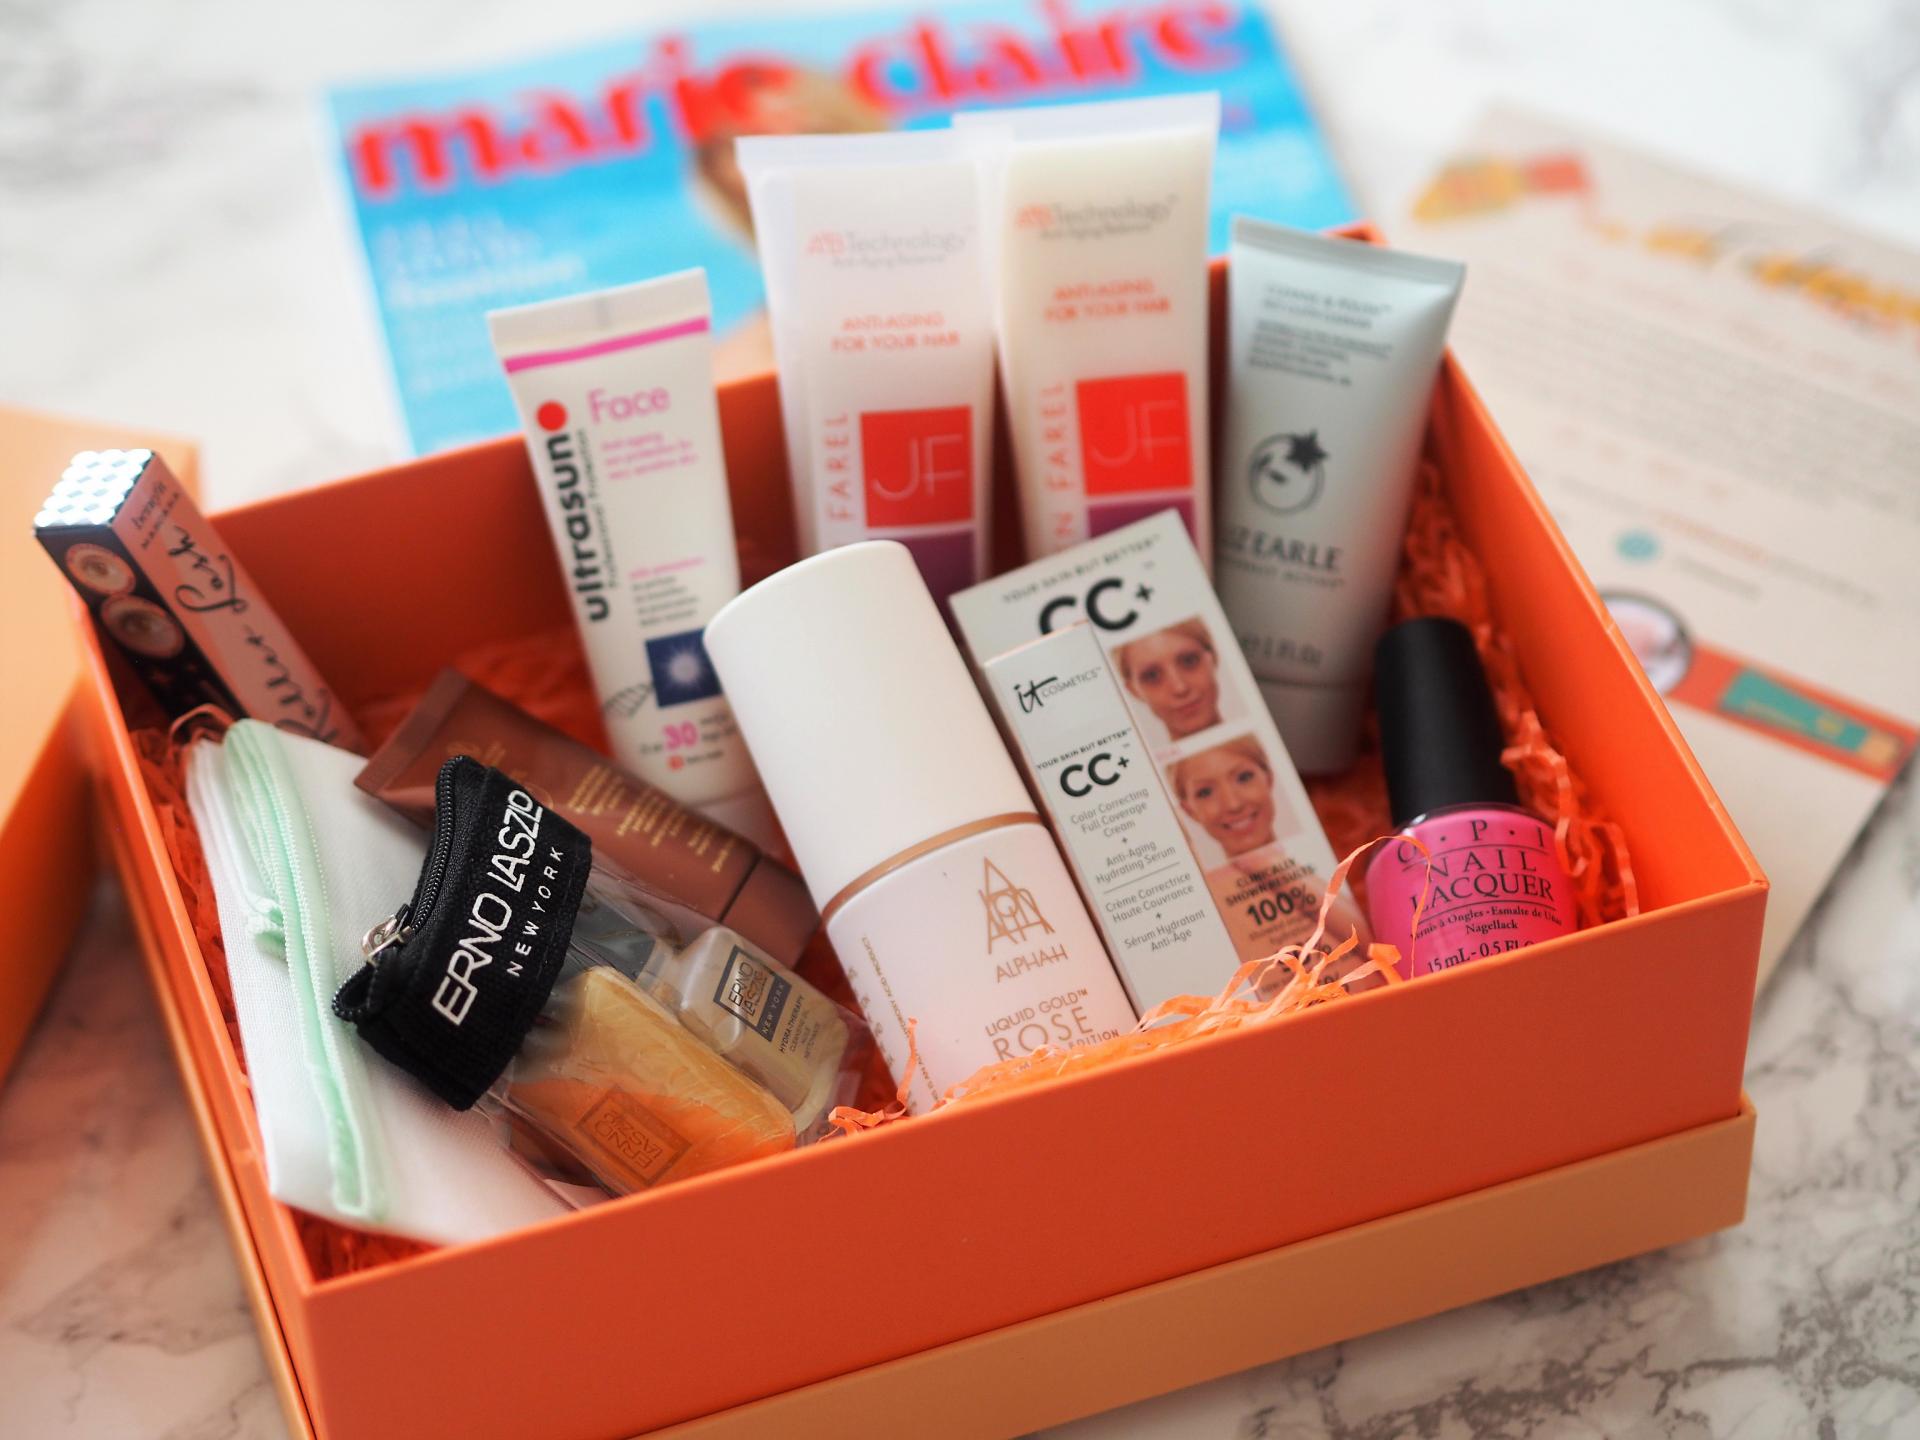 Try It, Love It: A New Beauty Box from QVC